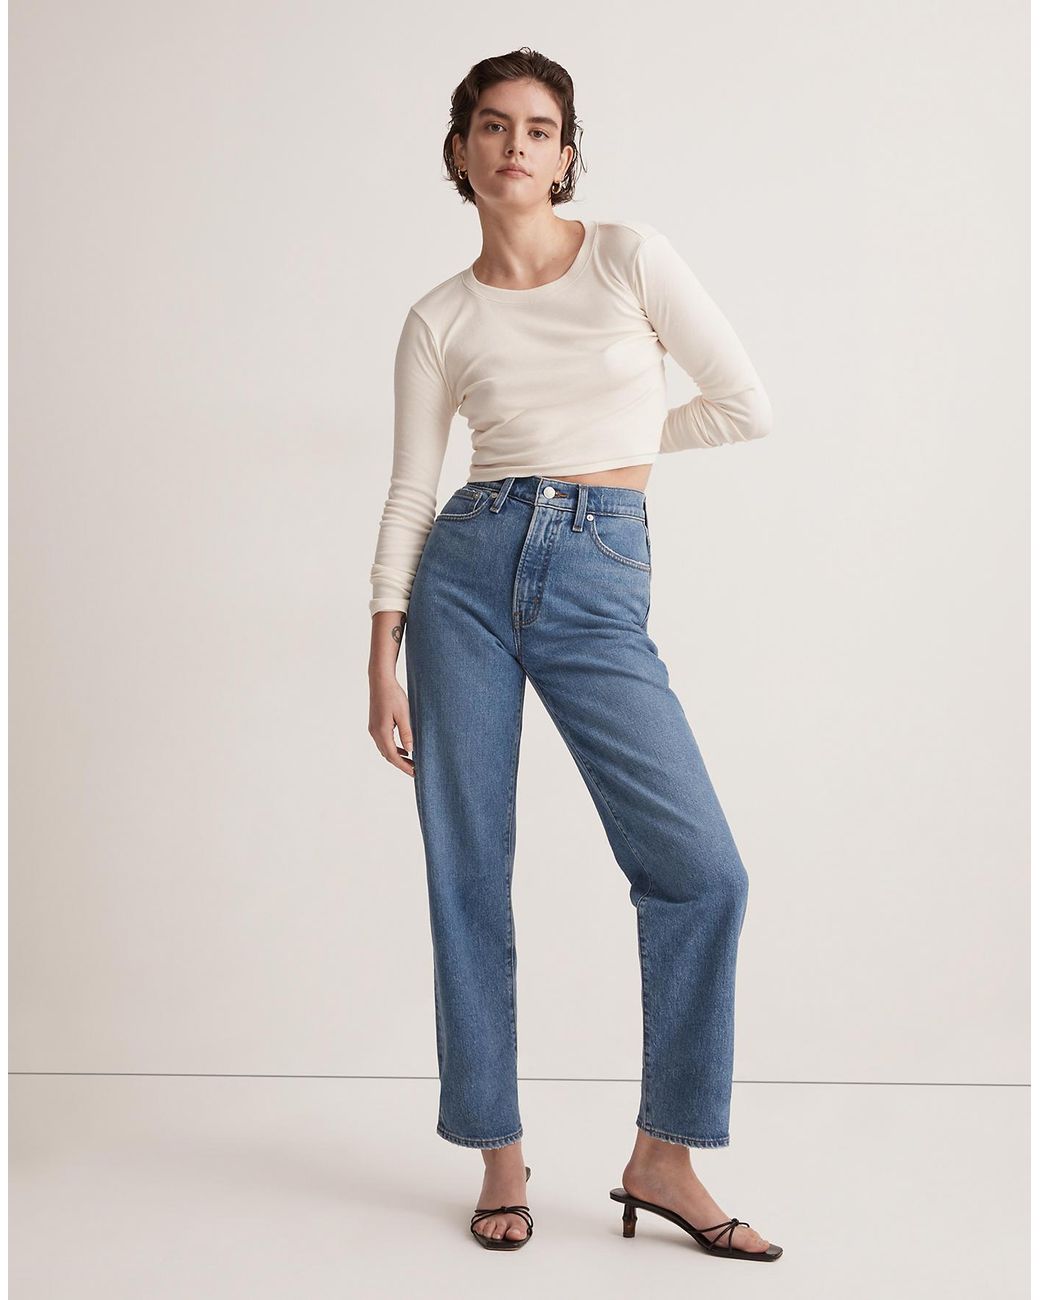 MW The Tall Perfect Vintage Straight Jean In Earlwood Wash in Blue Lyst